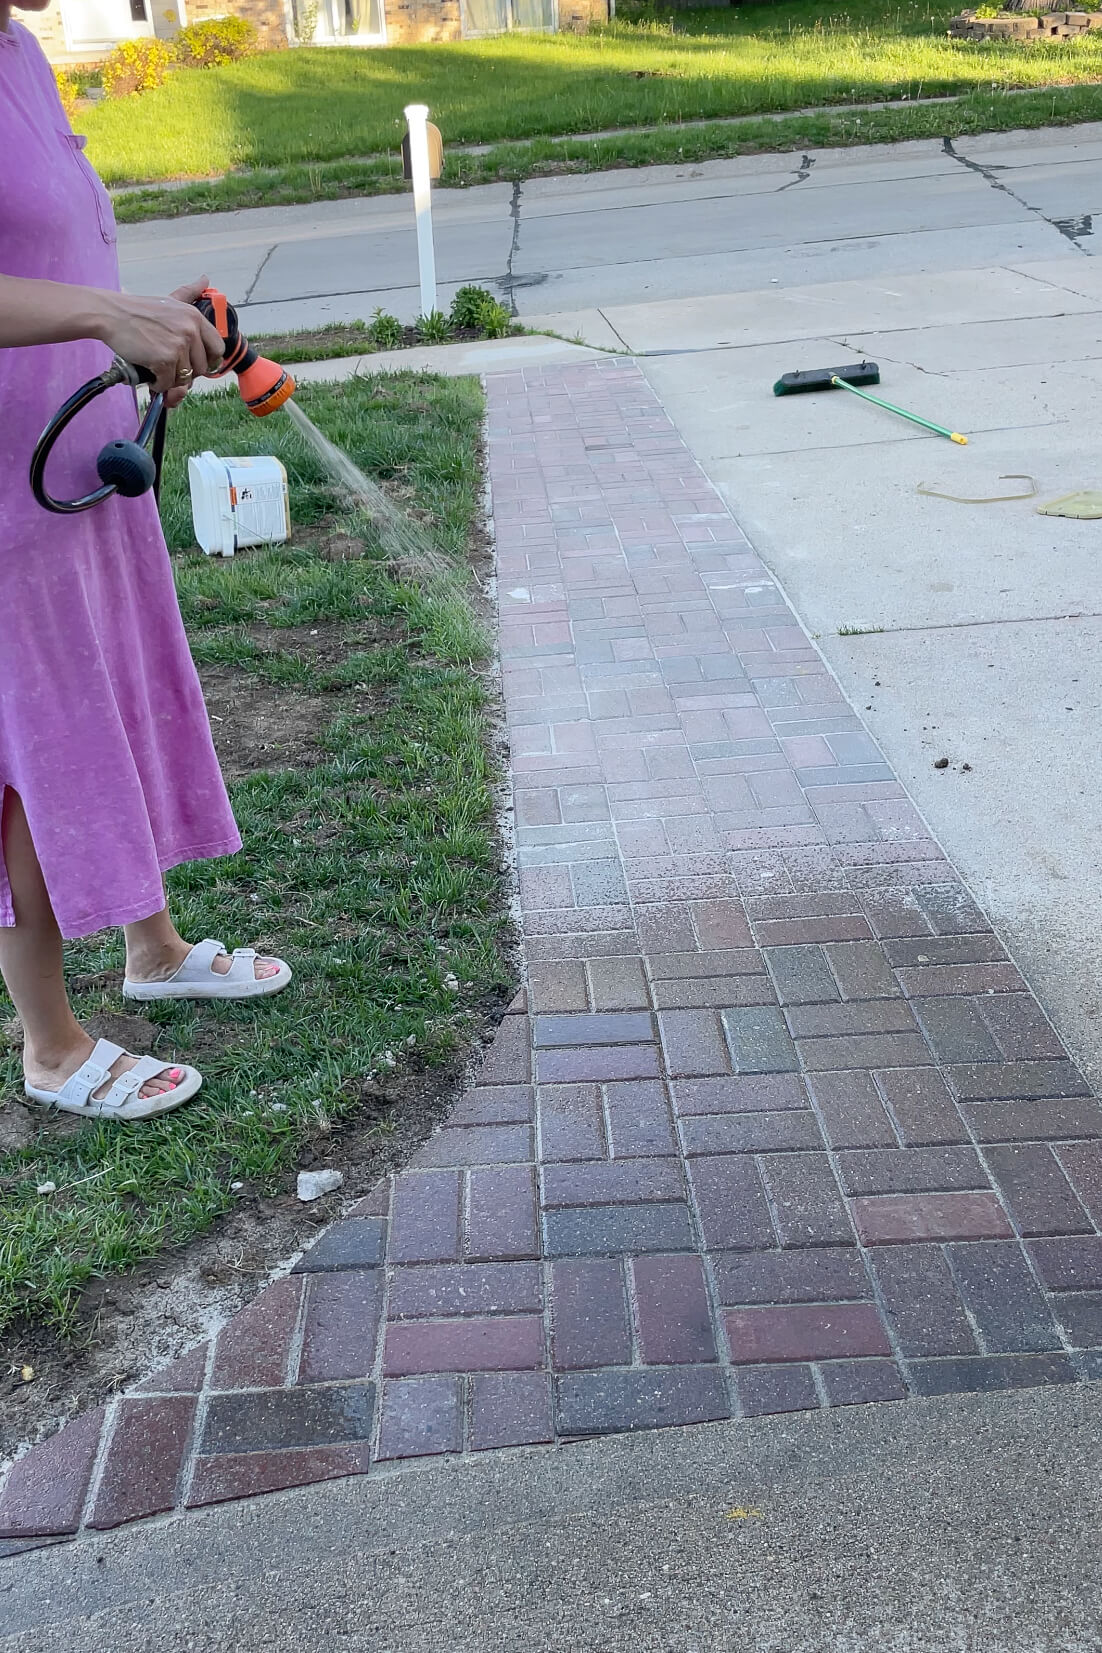 Spraying water on polymer sand so that it hardens around pavers.